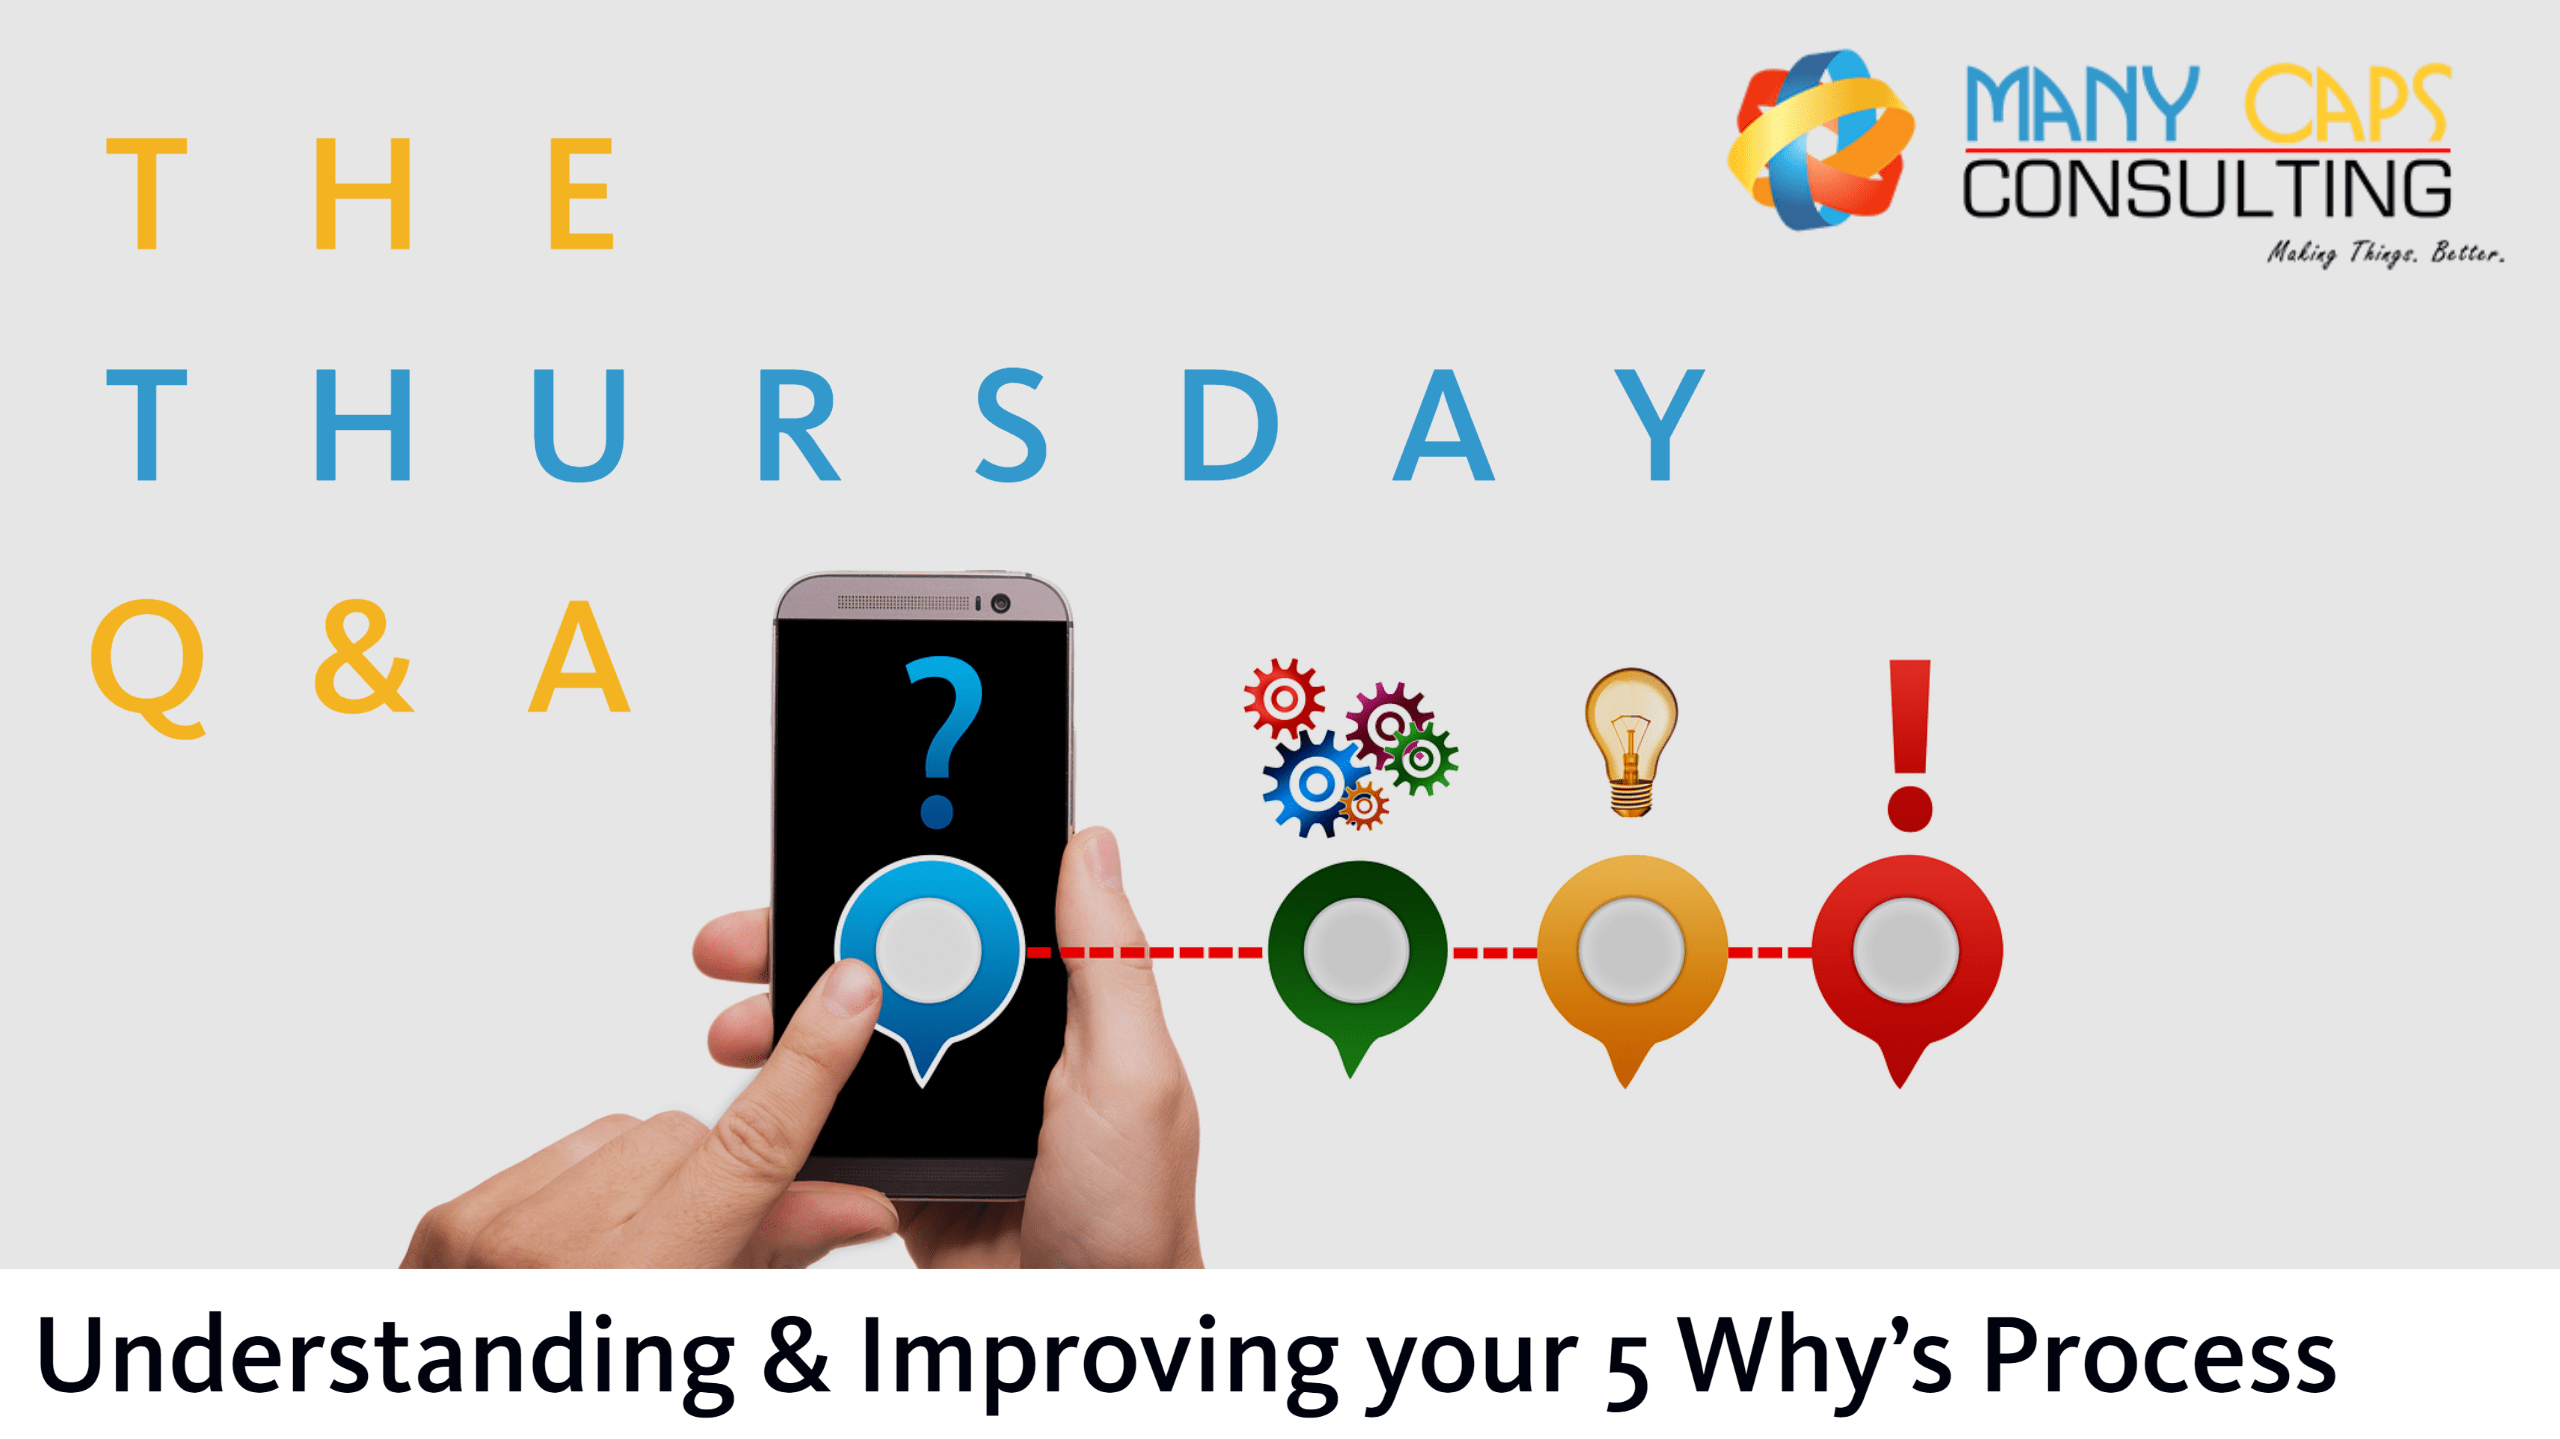 Thursday Q&A - Understanding & Improving your 5 Why's Process